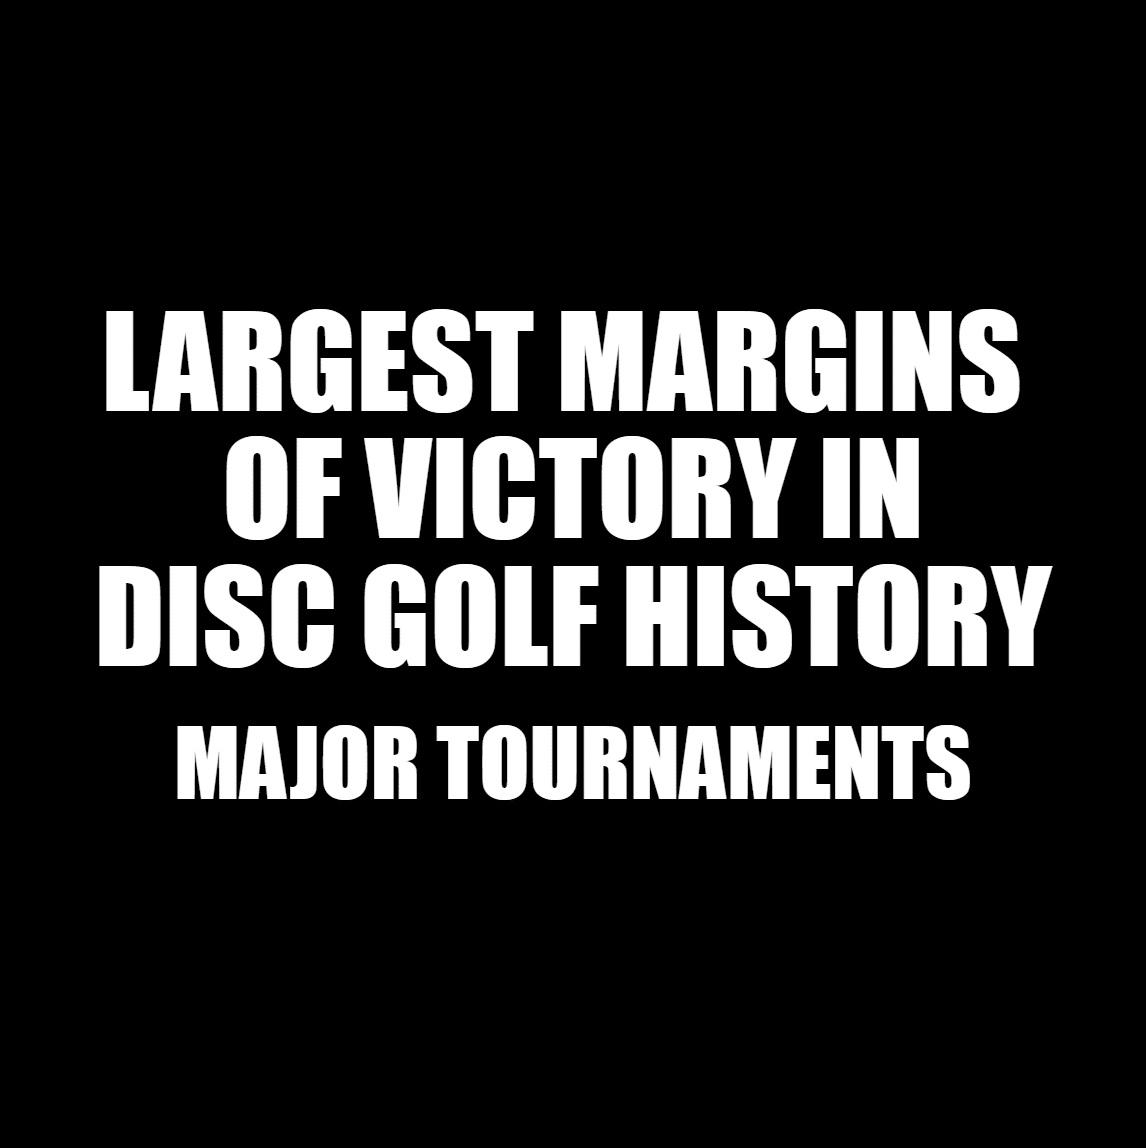 Largest margins of victory in disc golf history, major tournaments